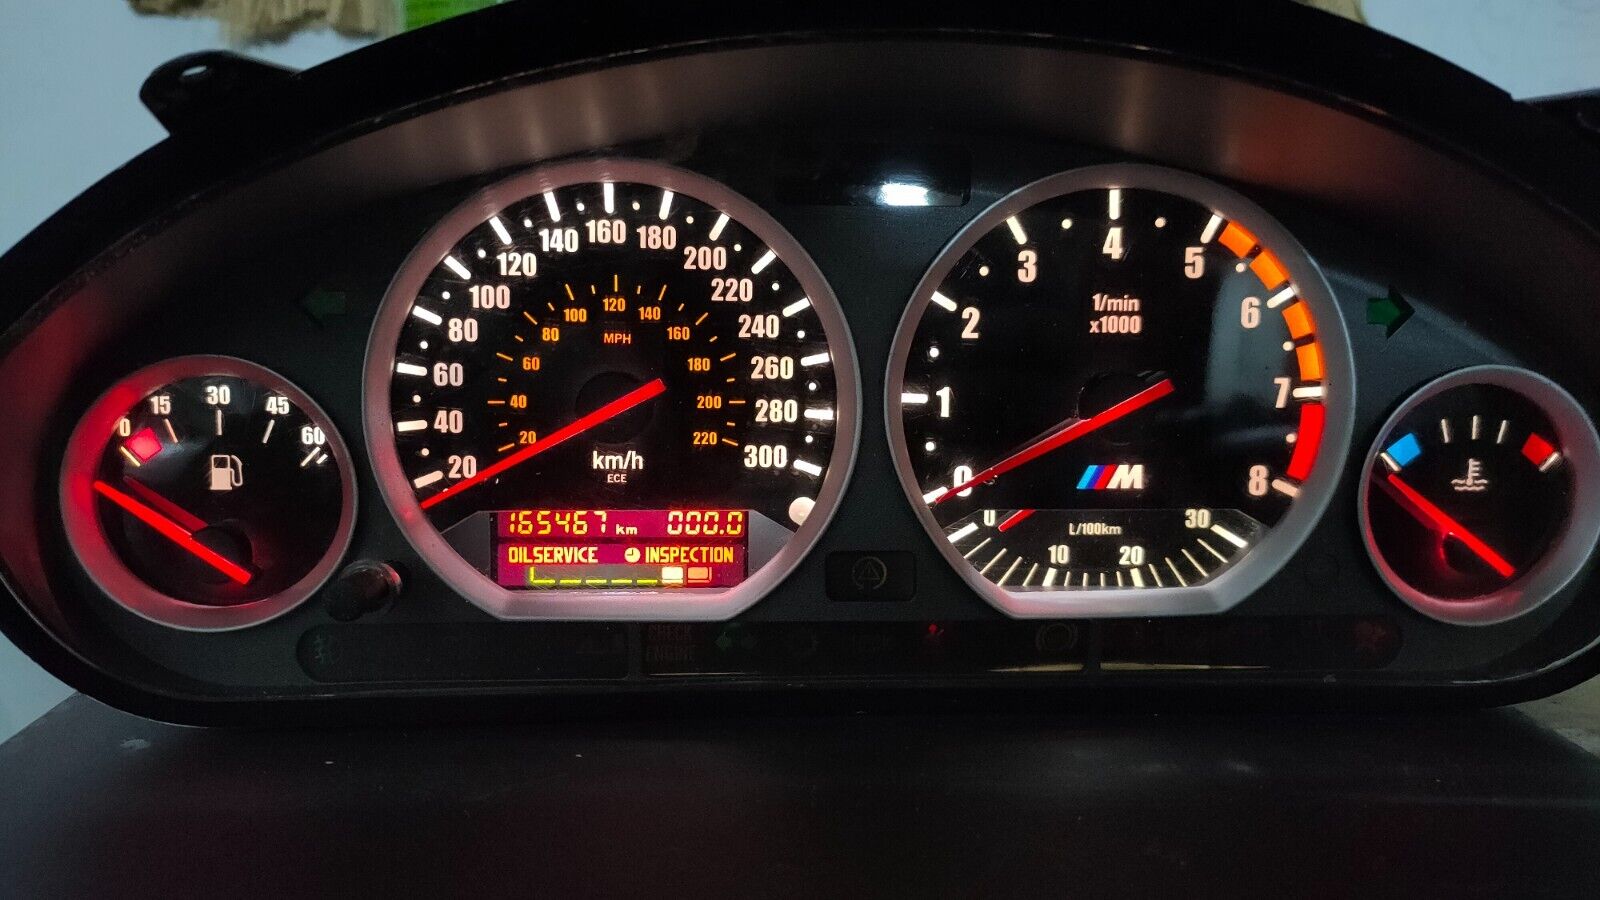 BMW e36 Instrument Cluster Replacement, can fit any OEM instrument